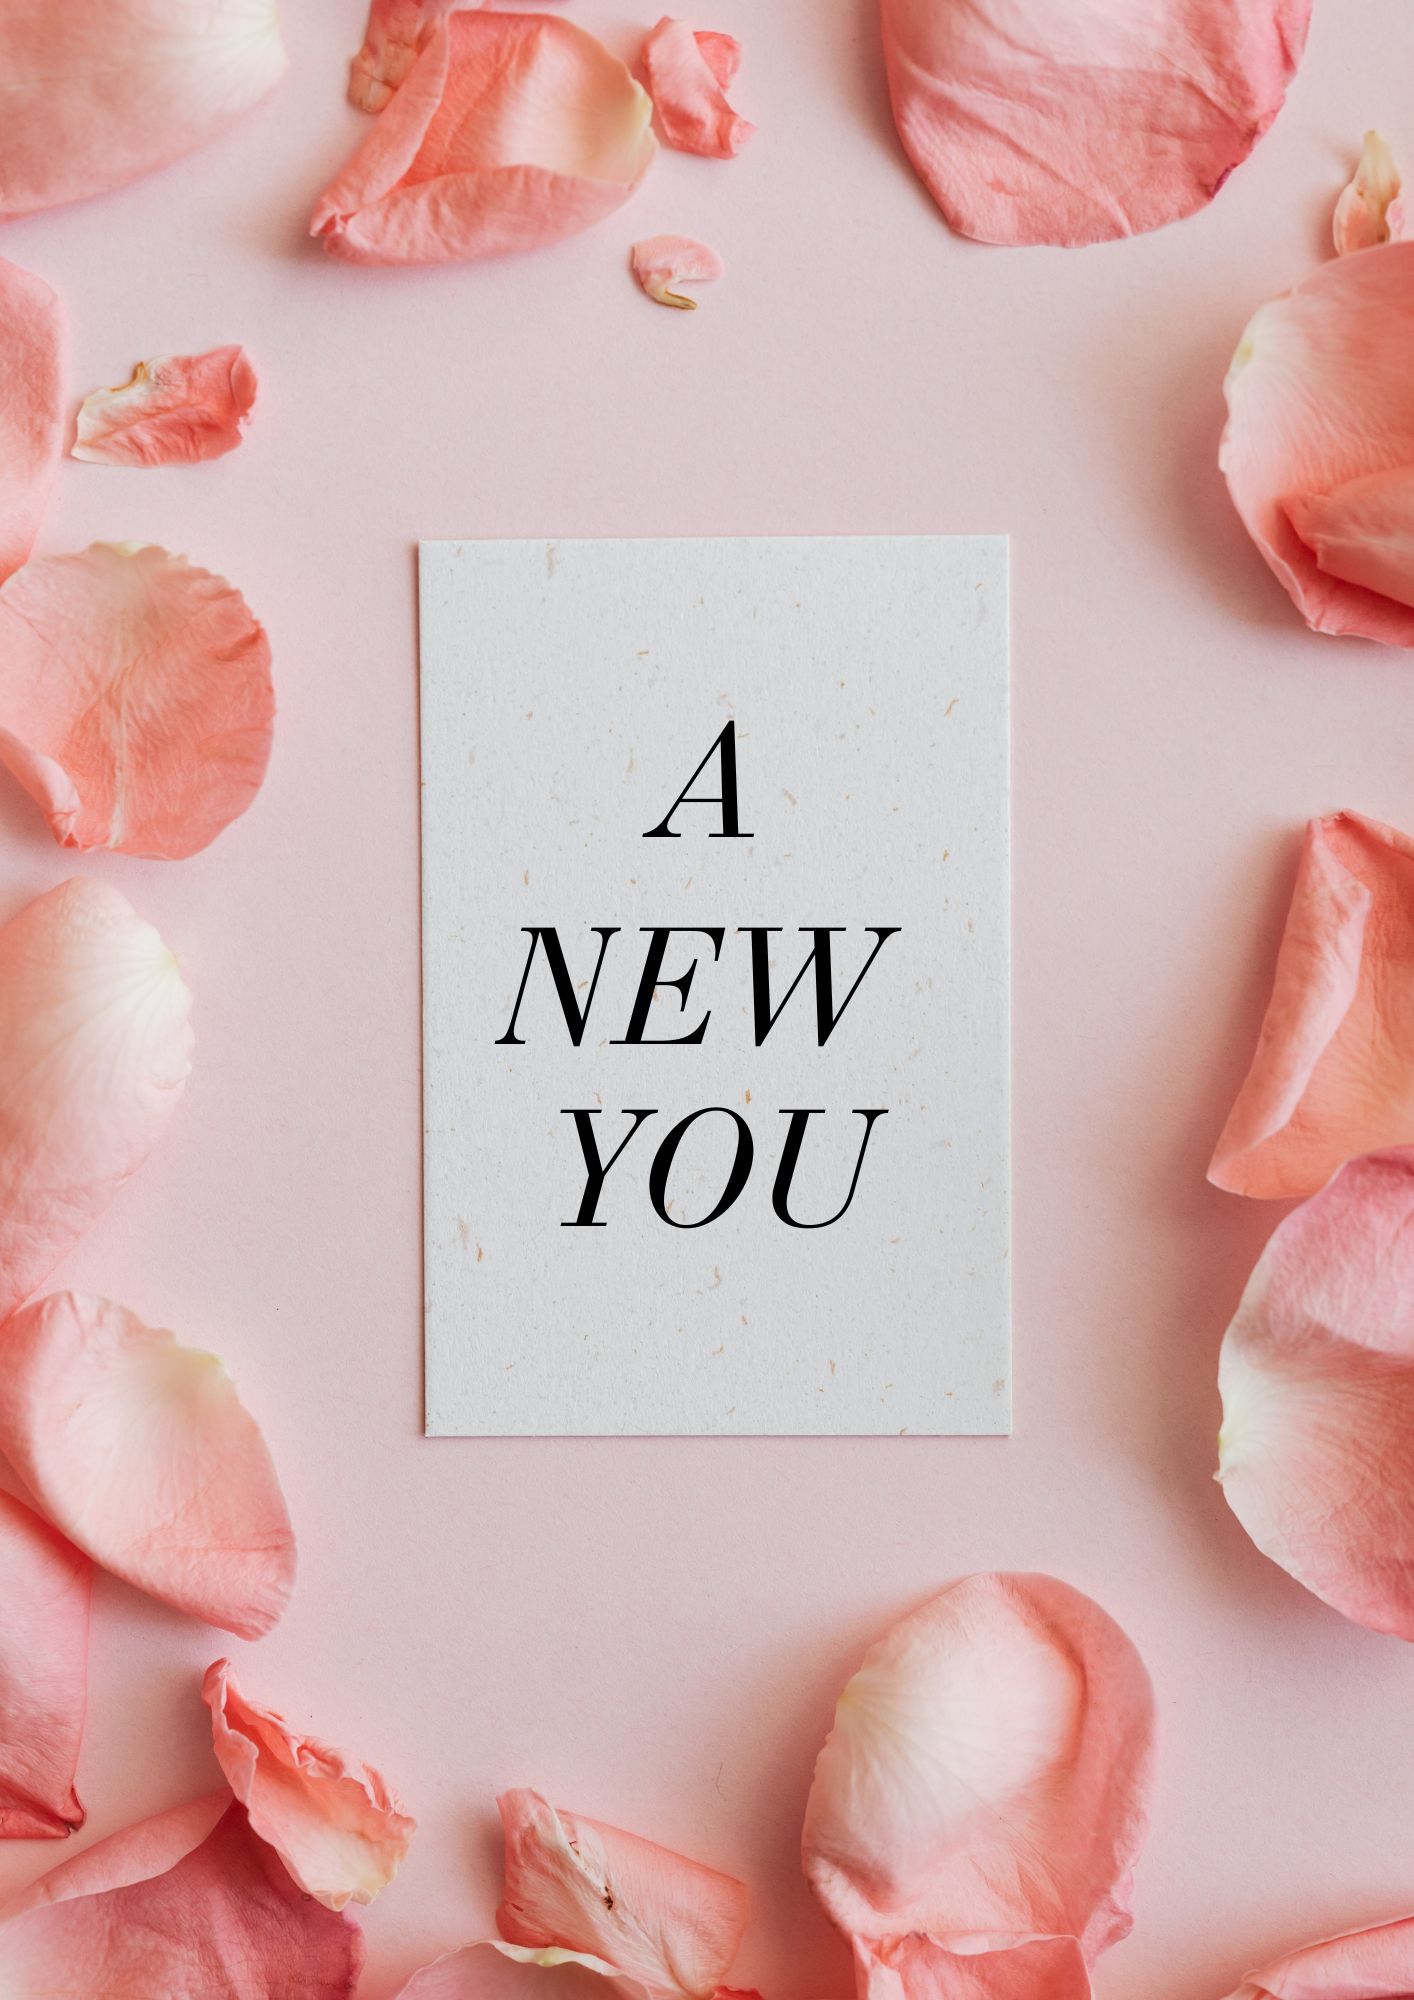 A NEW YOU